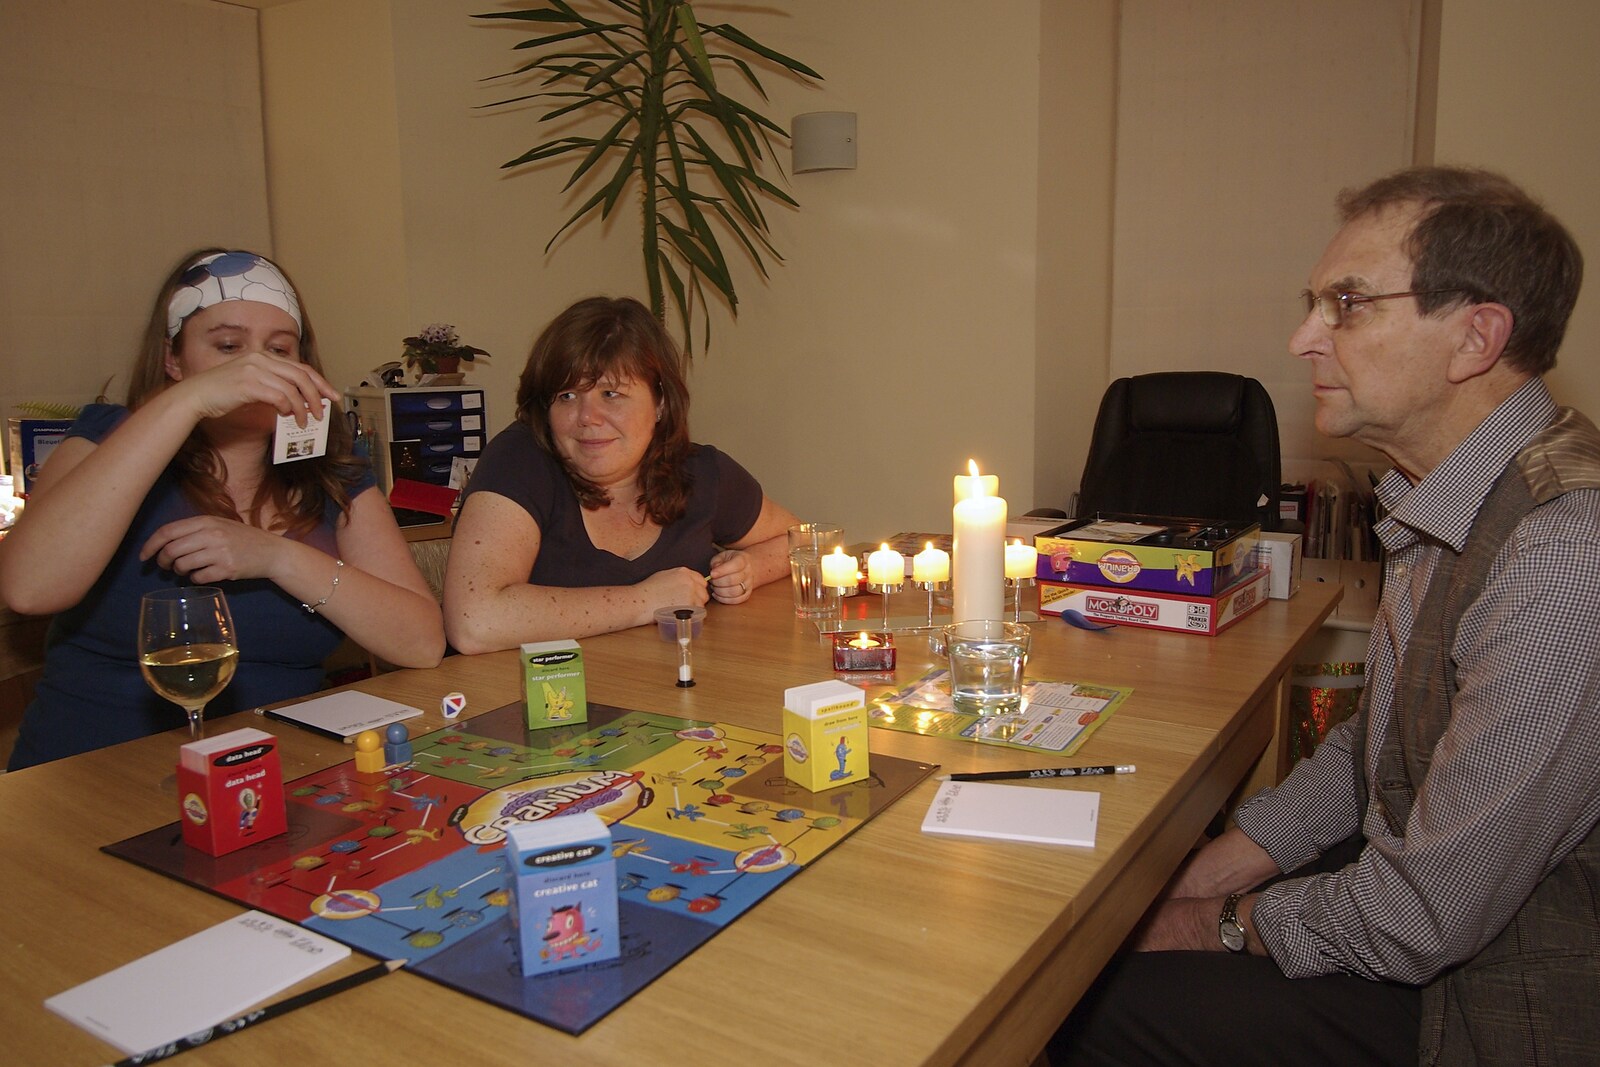 A game of Cranium occurs from Christmas at Sis and Matt's, Chagford, Devon - 25th December 2007